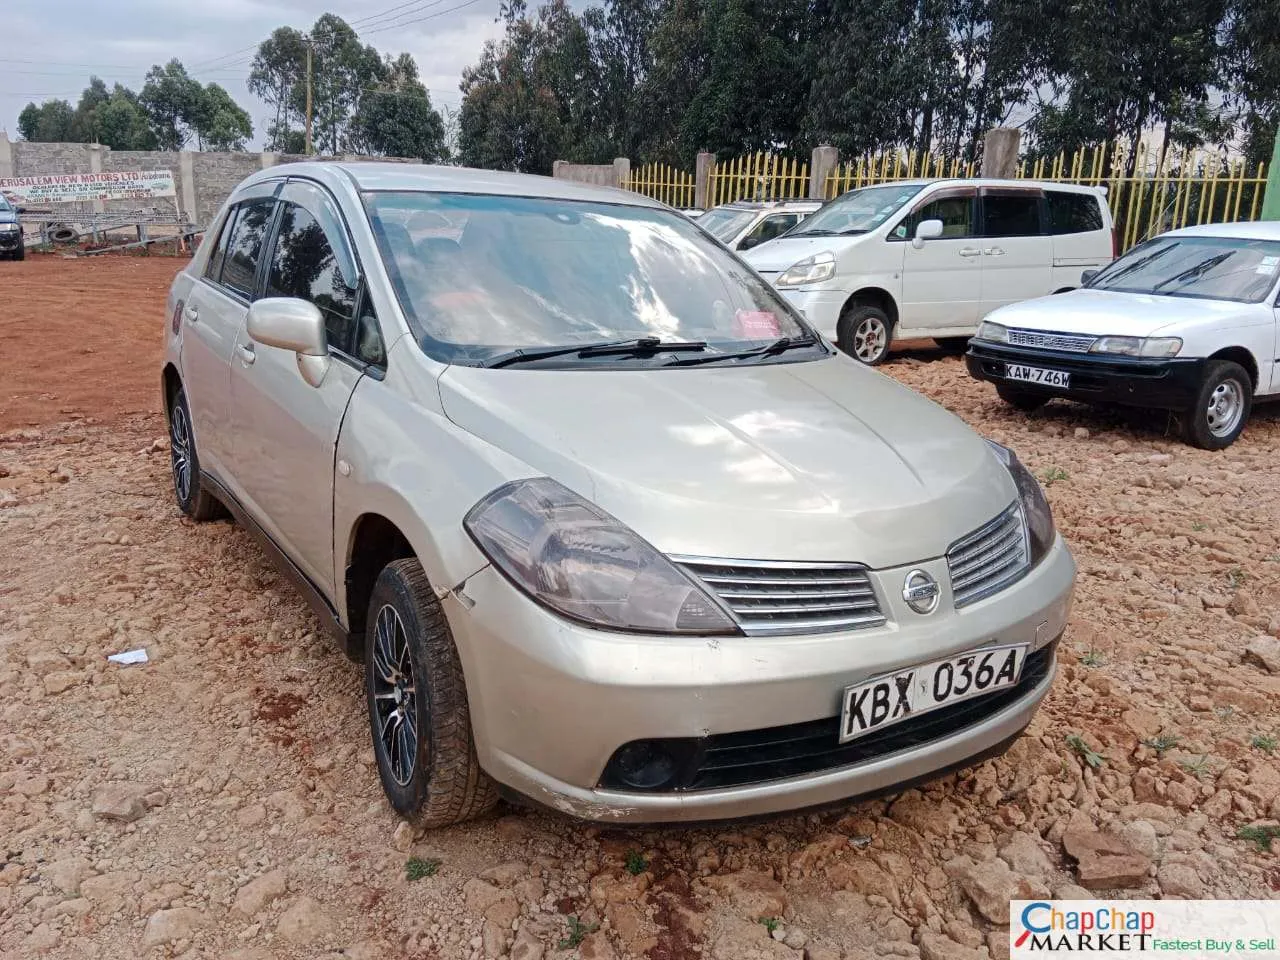 Cars Cars For Sale-Nissan Tiida kenya 270K ONLY You Pay 35% Deposit Trade in Ok tiida for sale in kenya hire purchase installments EXCLUSIVE latio saloon 3